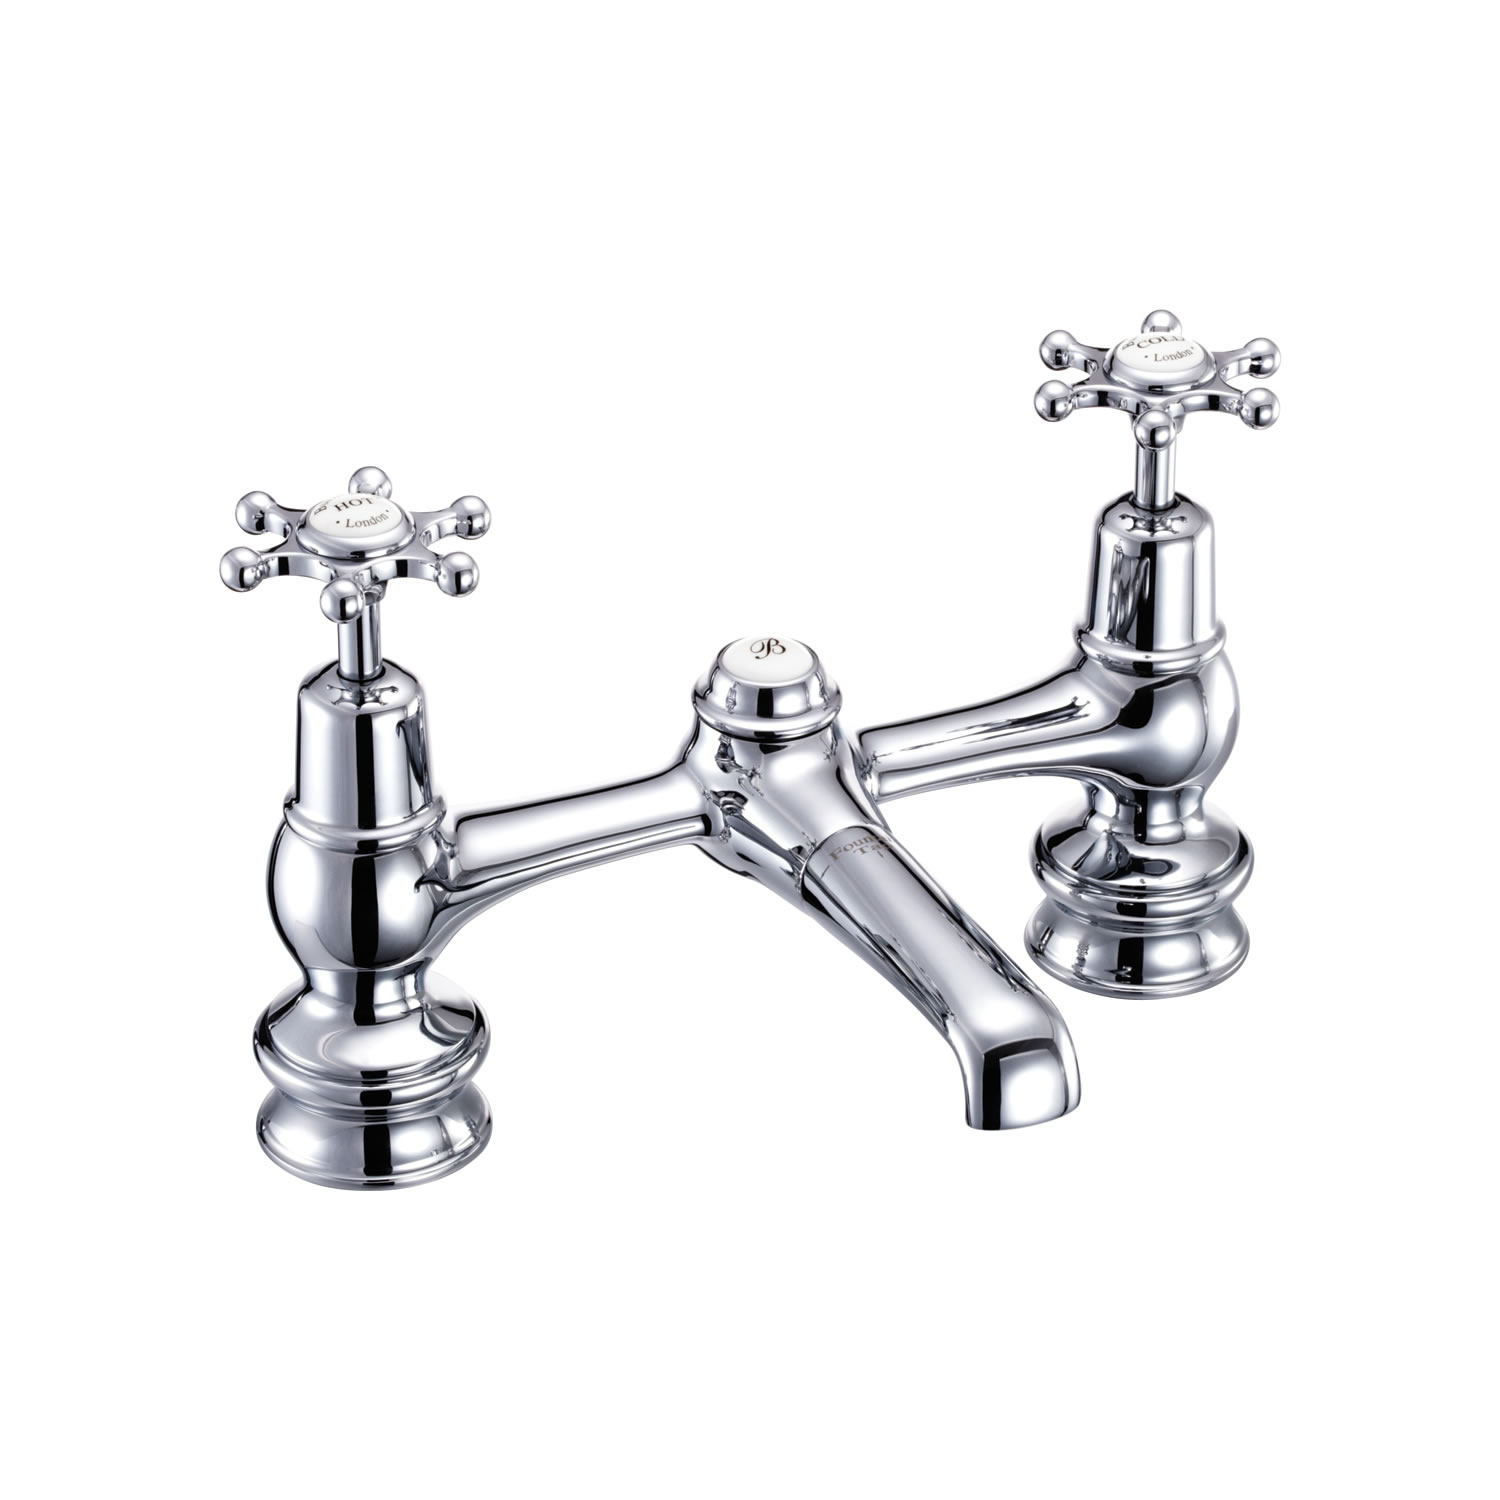 Birkenhead Regent 2 tap hole bridge basin mixer with low central indice with plug and chain waste with swivel spout